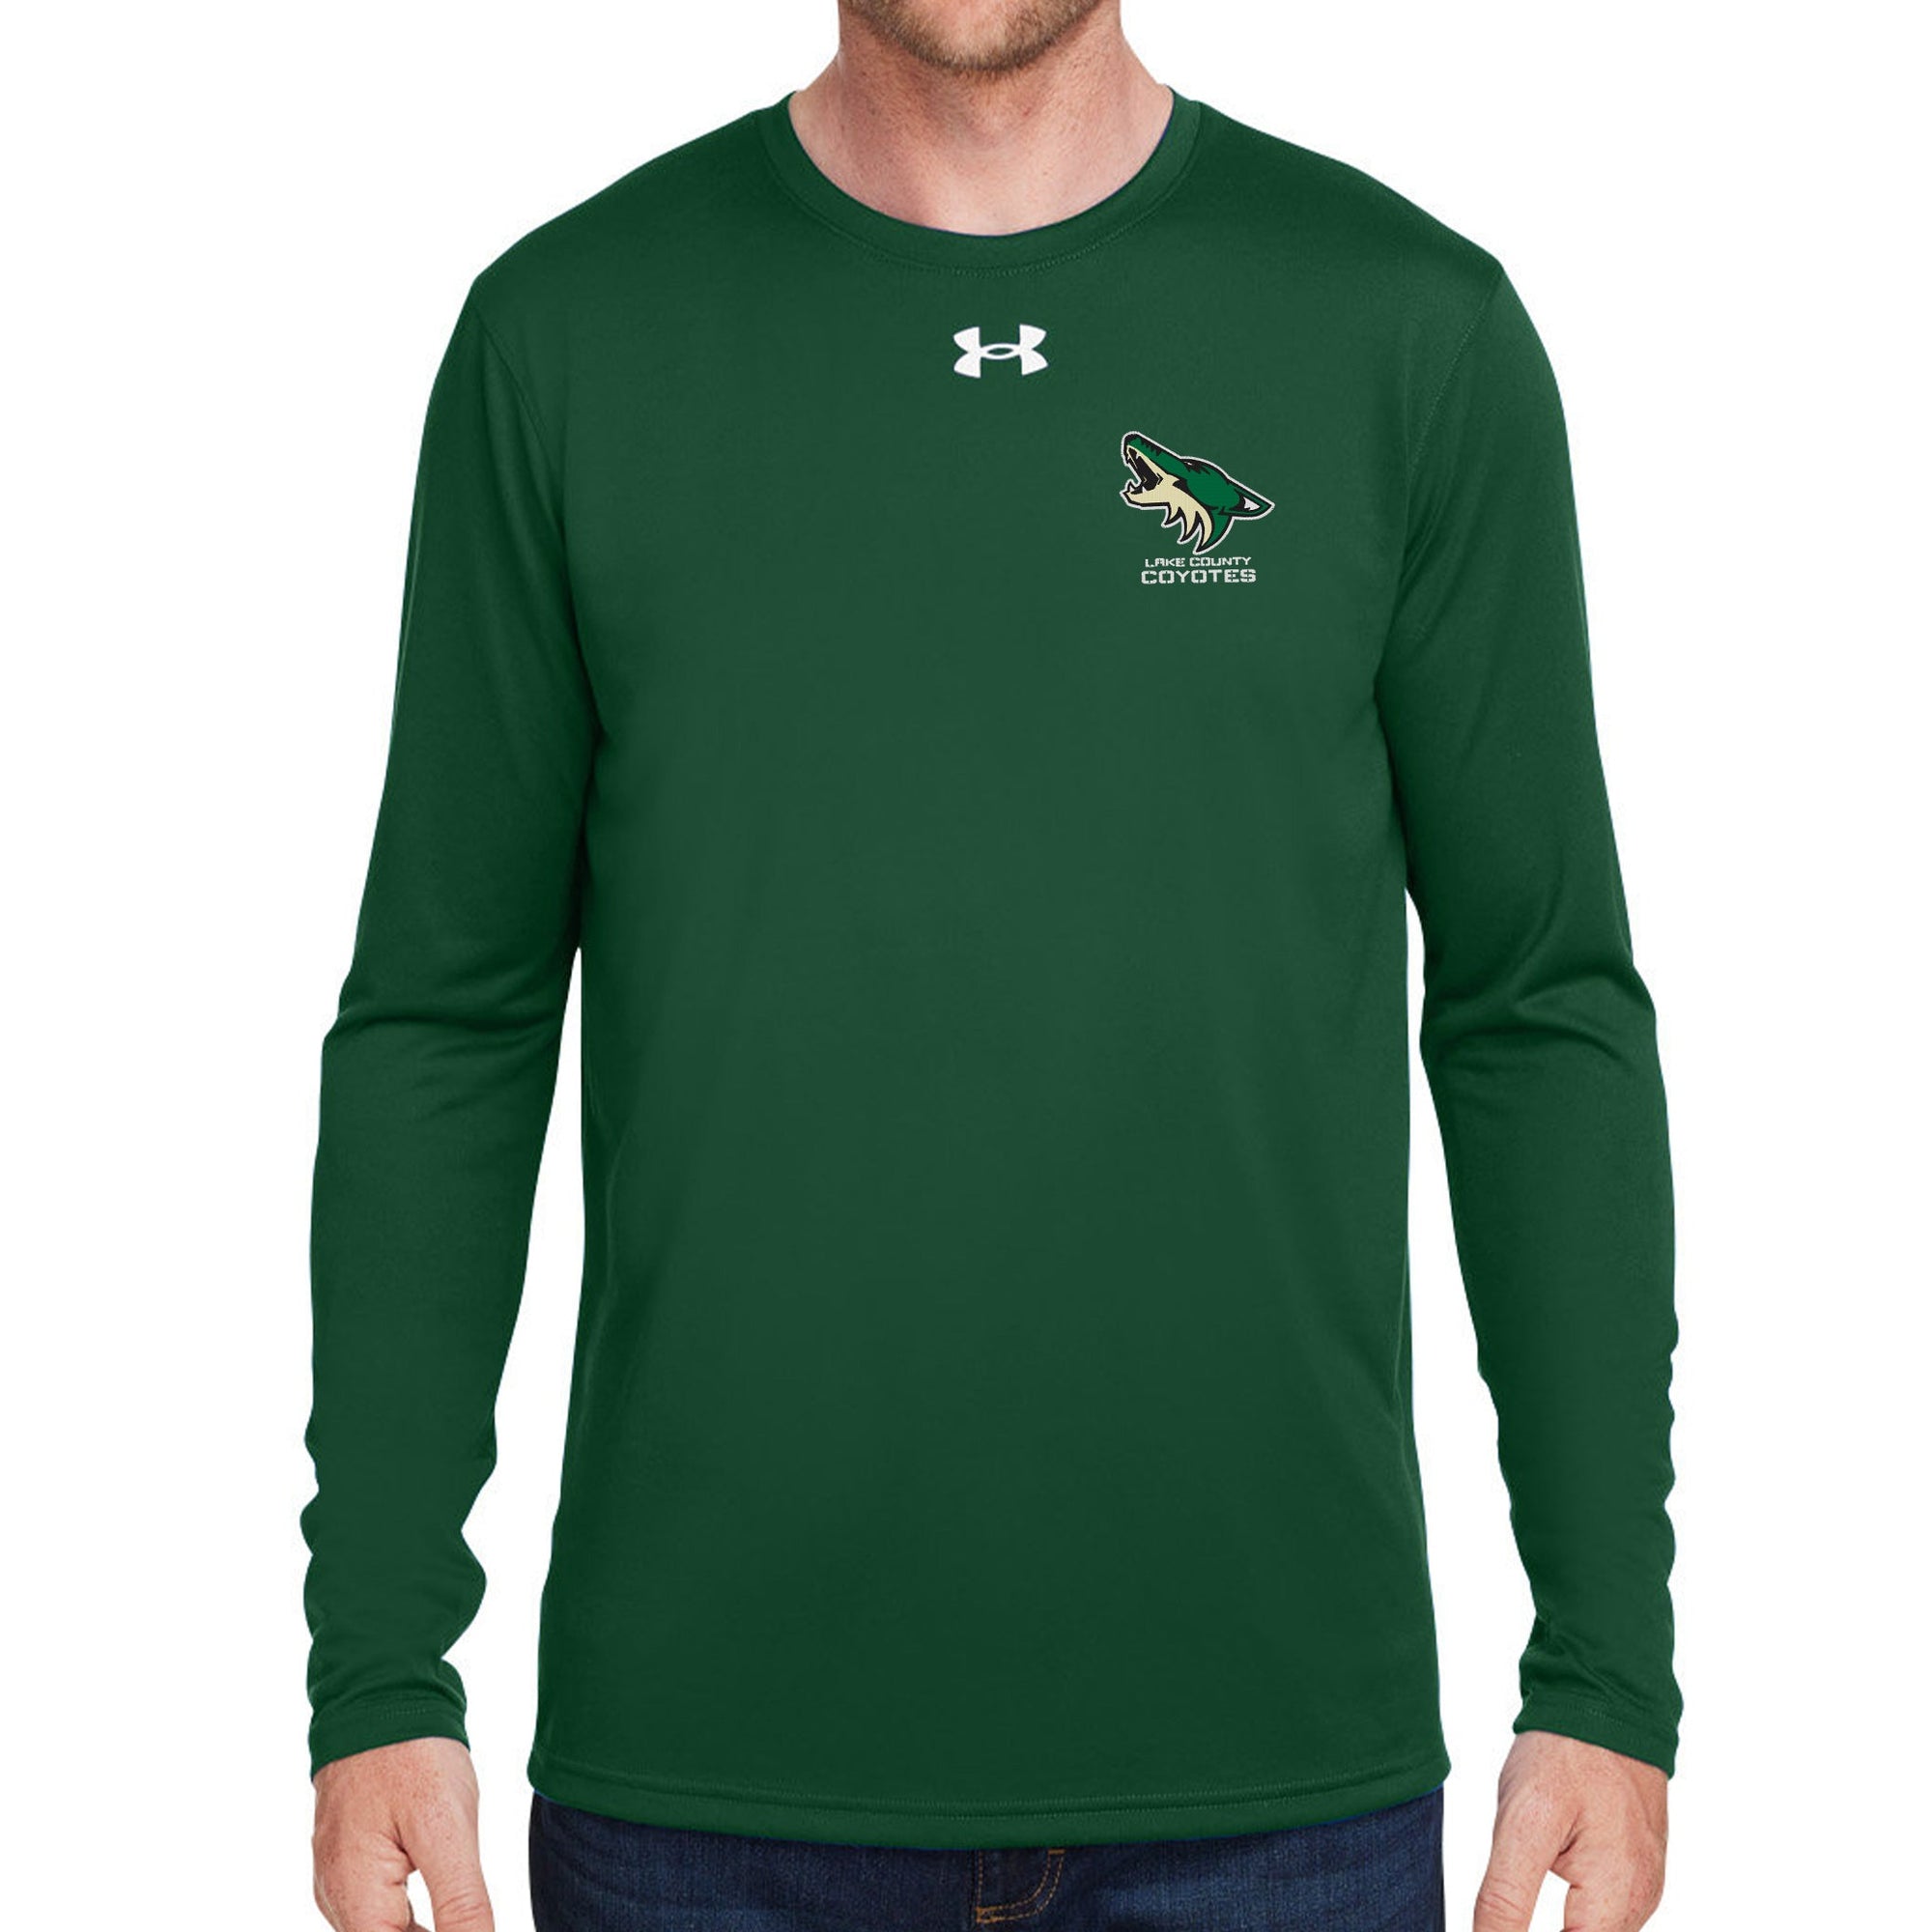 Rugby Imports Lake County Tech LS T-Shirt